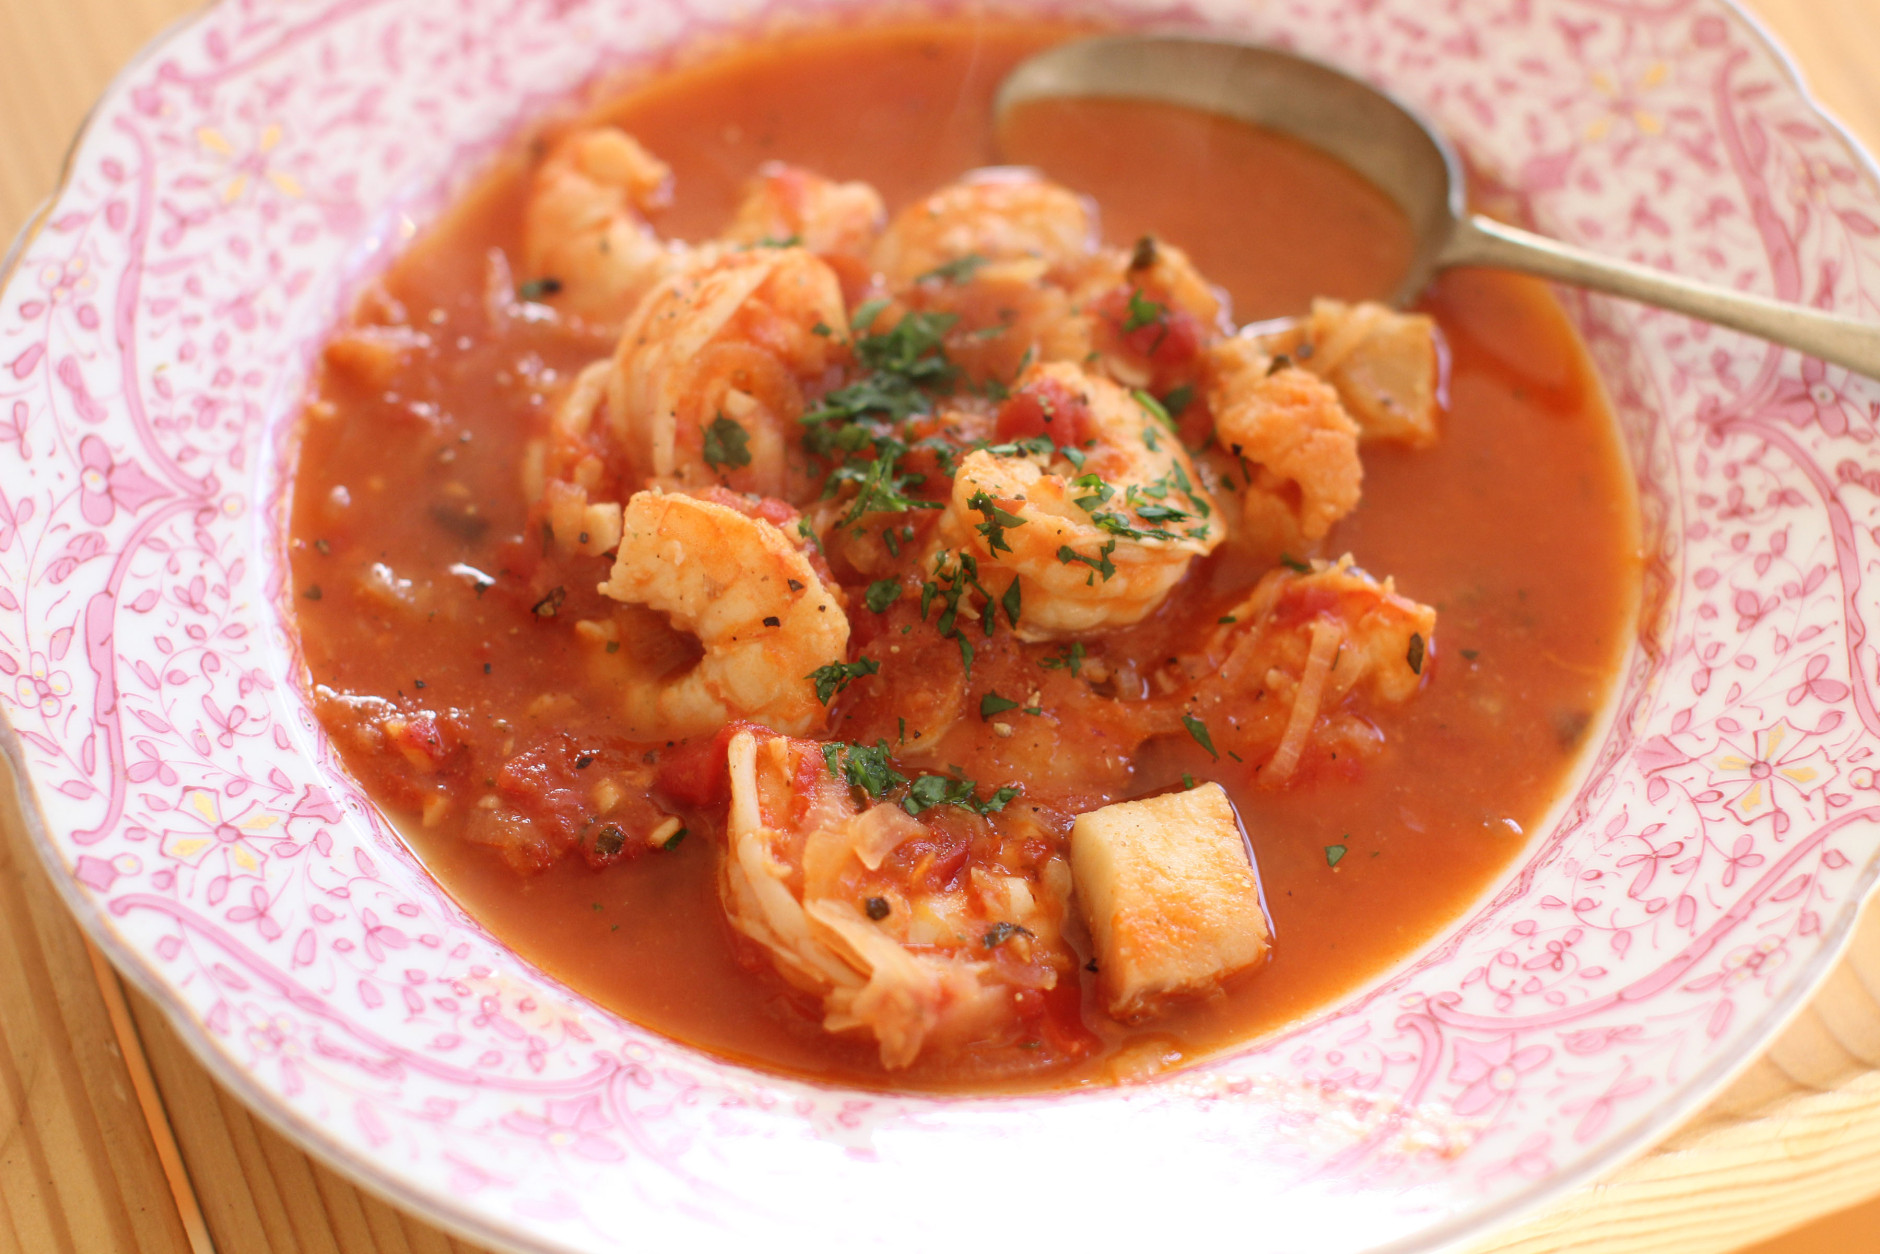 This Oct. 26, 2015, photo, shows quick cioppino in Concord, N.H. Cioppino is a tomato-based fish stew that relies on simple and healthy ingredients for flavor. Plus, its the ultimate guilt-free comfort food. (AP Photo/Matthew Mead)